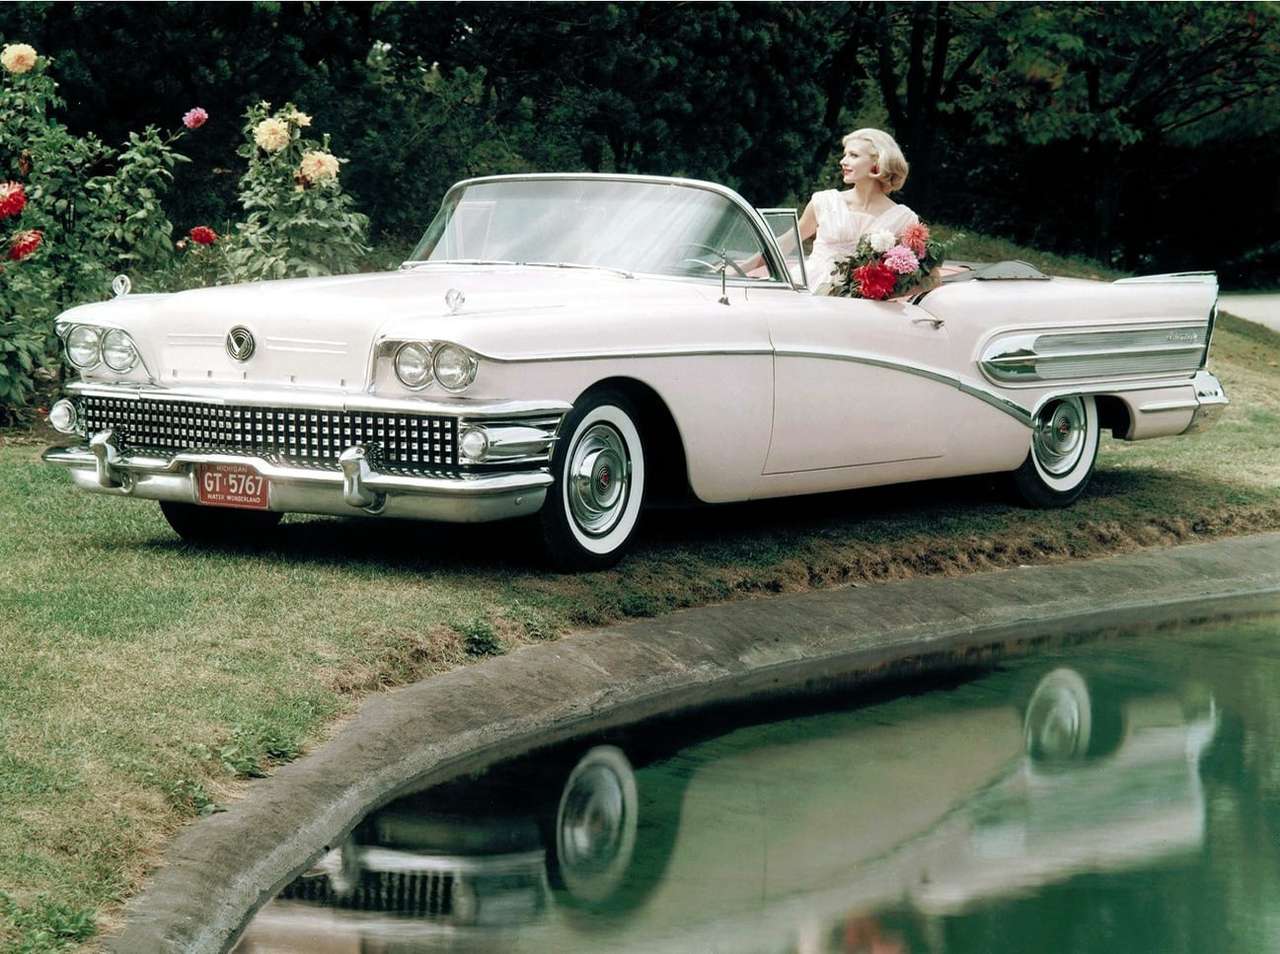 1958 Buick Limited convertible online puzzle